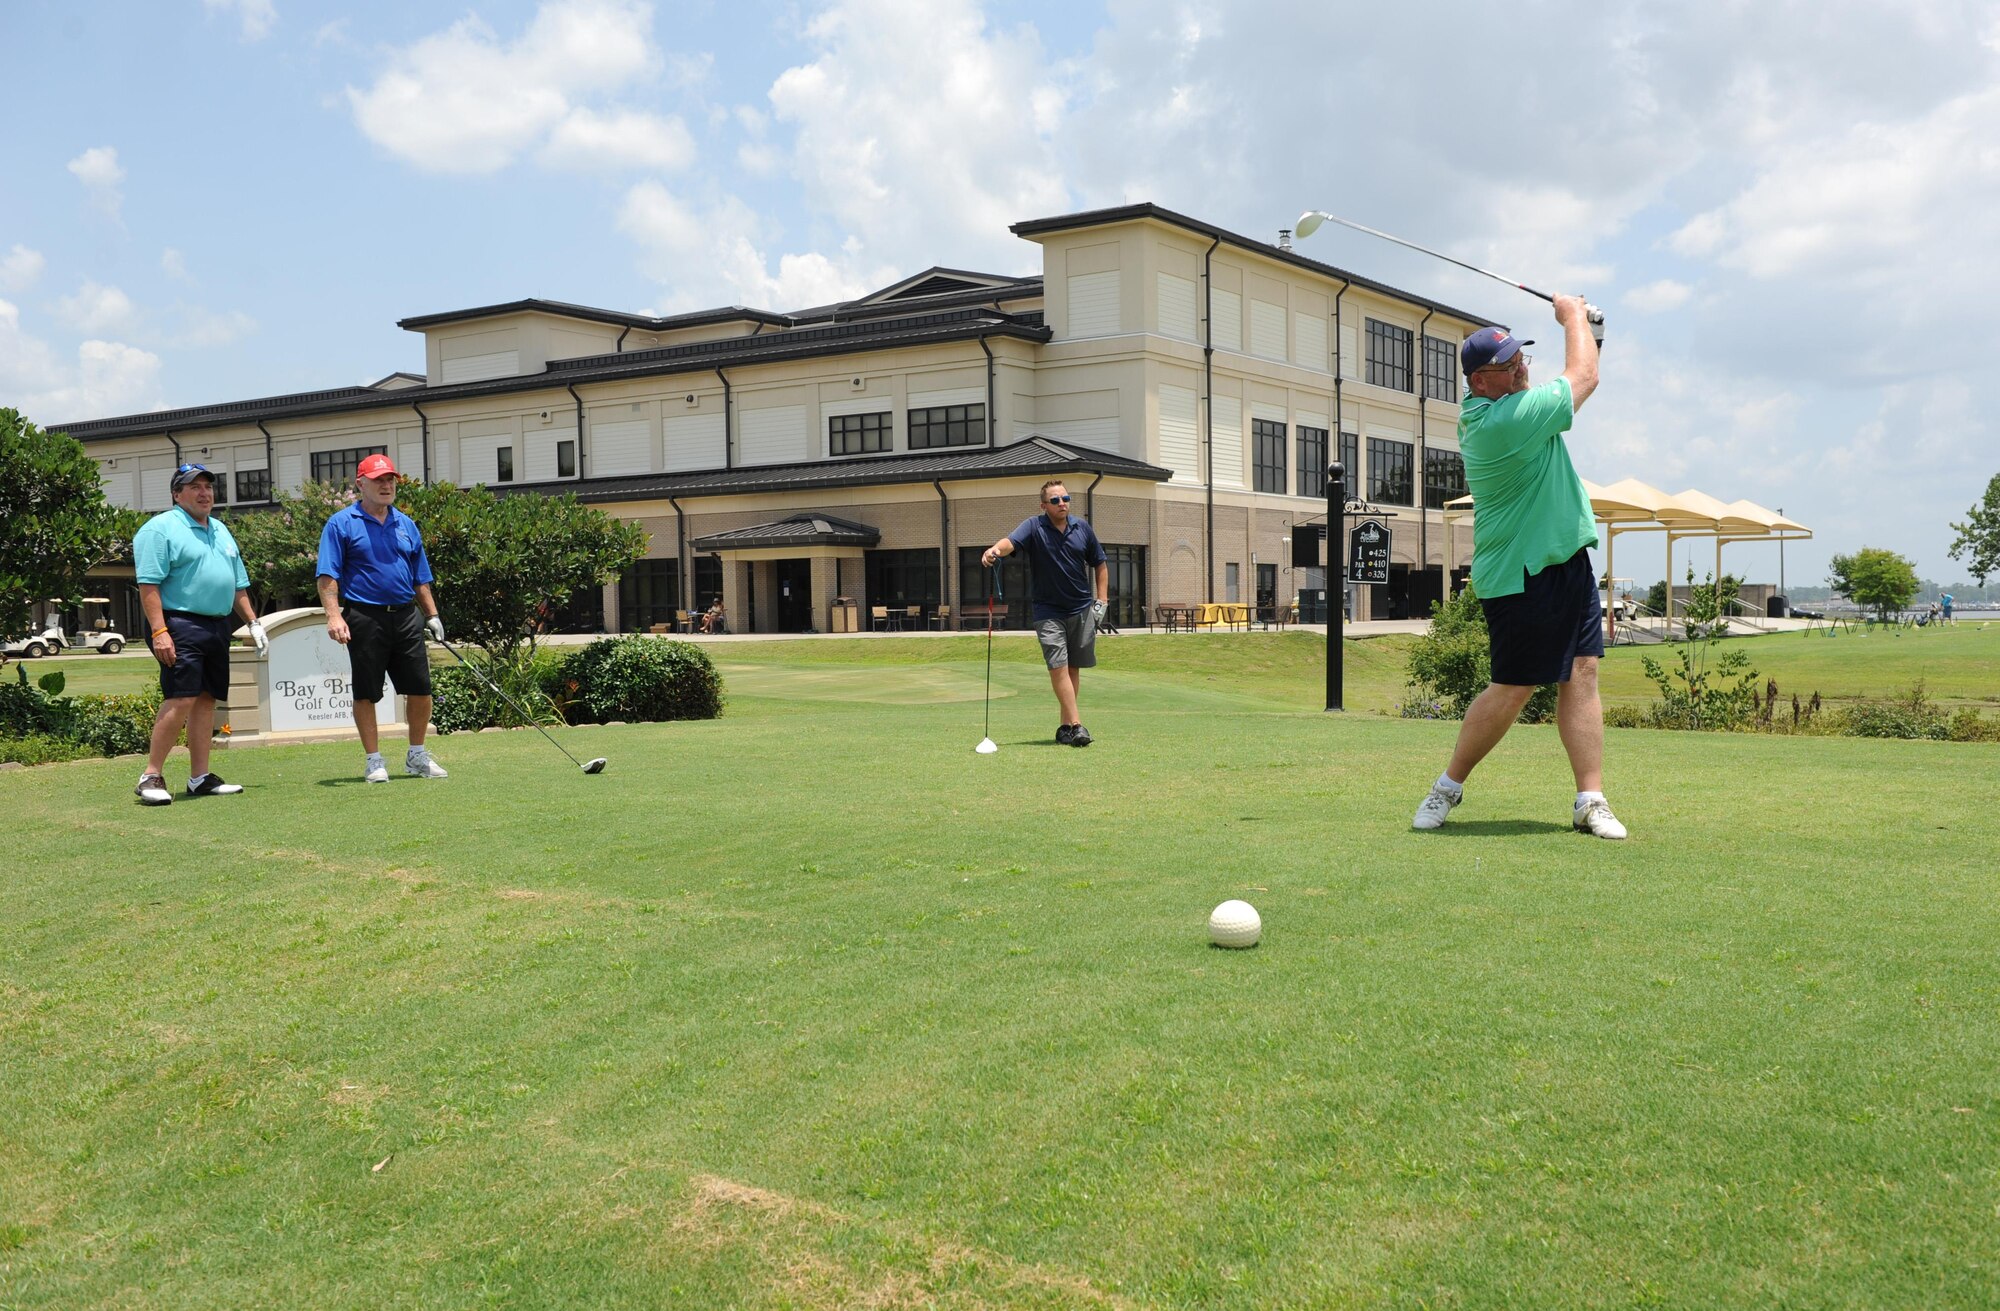 Chris McIntyre, 81st Force Support Squadron deputy commander, tees off during the Don Wylie Memorial Golf Tournament at the Bay Breeze Golf Course June 17, 2016, Keesler Air Force Base, Miss. The annual tournament raised funds to help the Military & Veterans Affairs committee honor military members. (U.S. Air Force photo by Kemberly Groue)